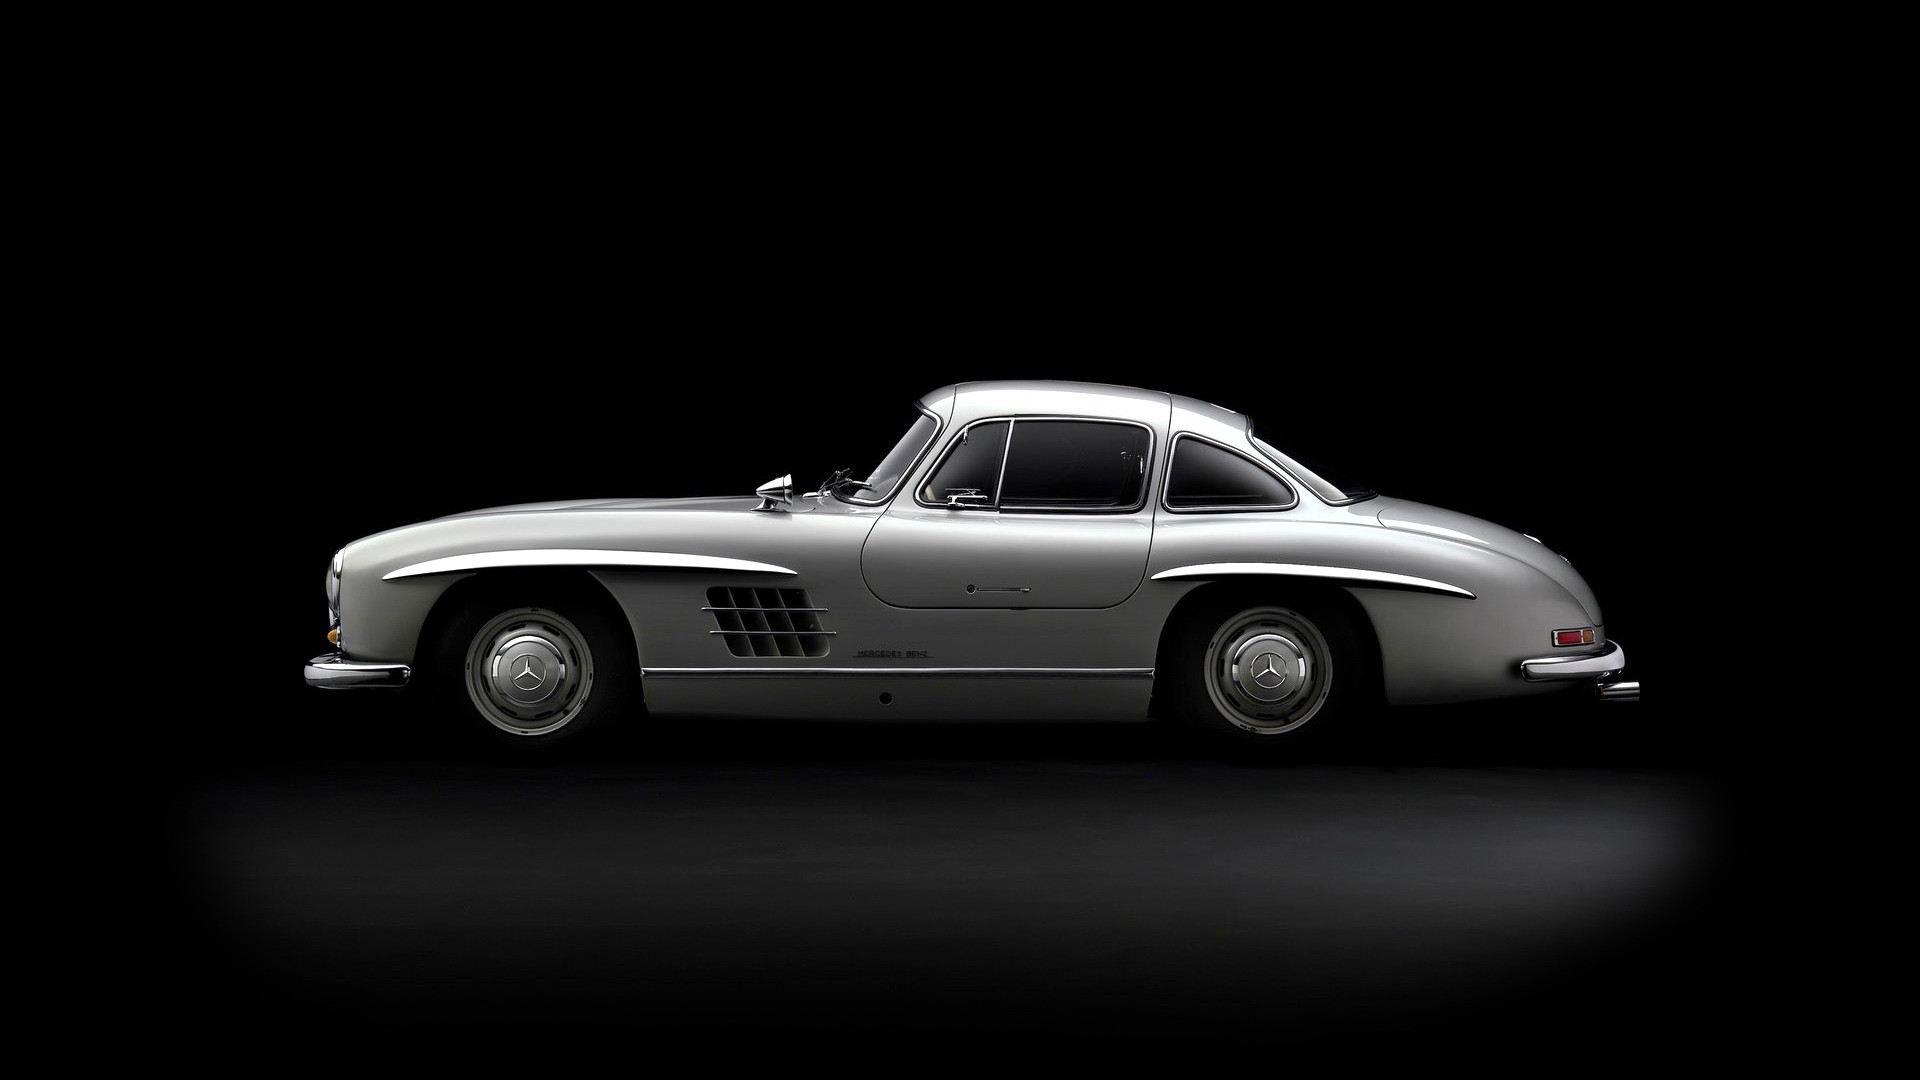 1920x1080 1954 mercedes benz 300 sl gullwing wallpapers hd images hd wallpapers of  bugatti chiron download hd